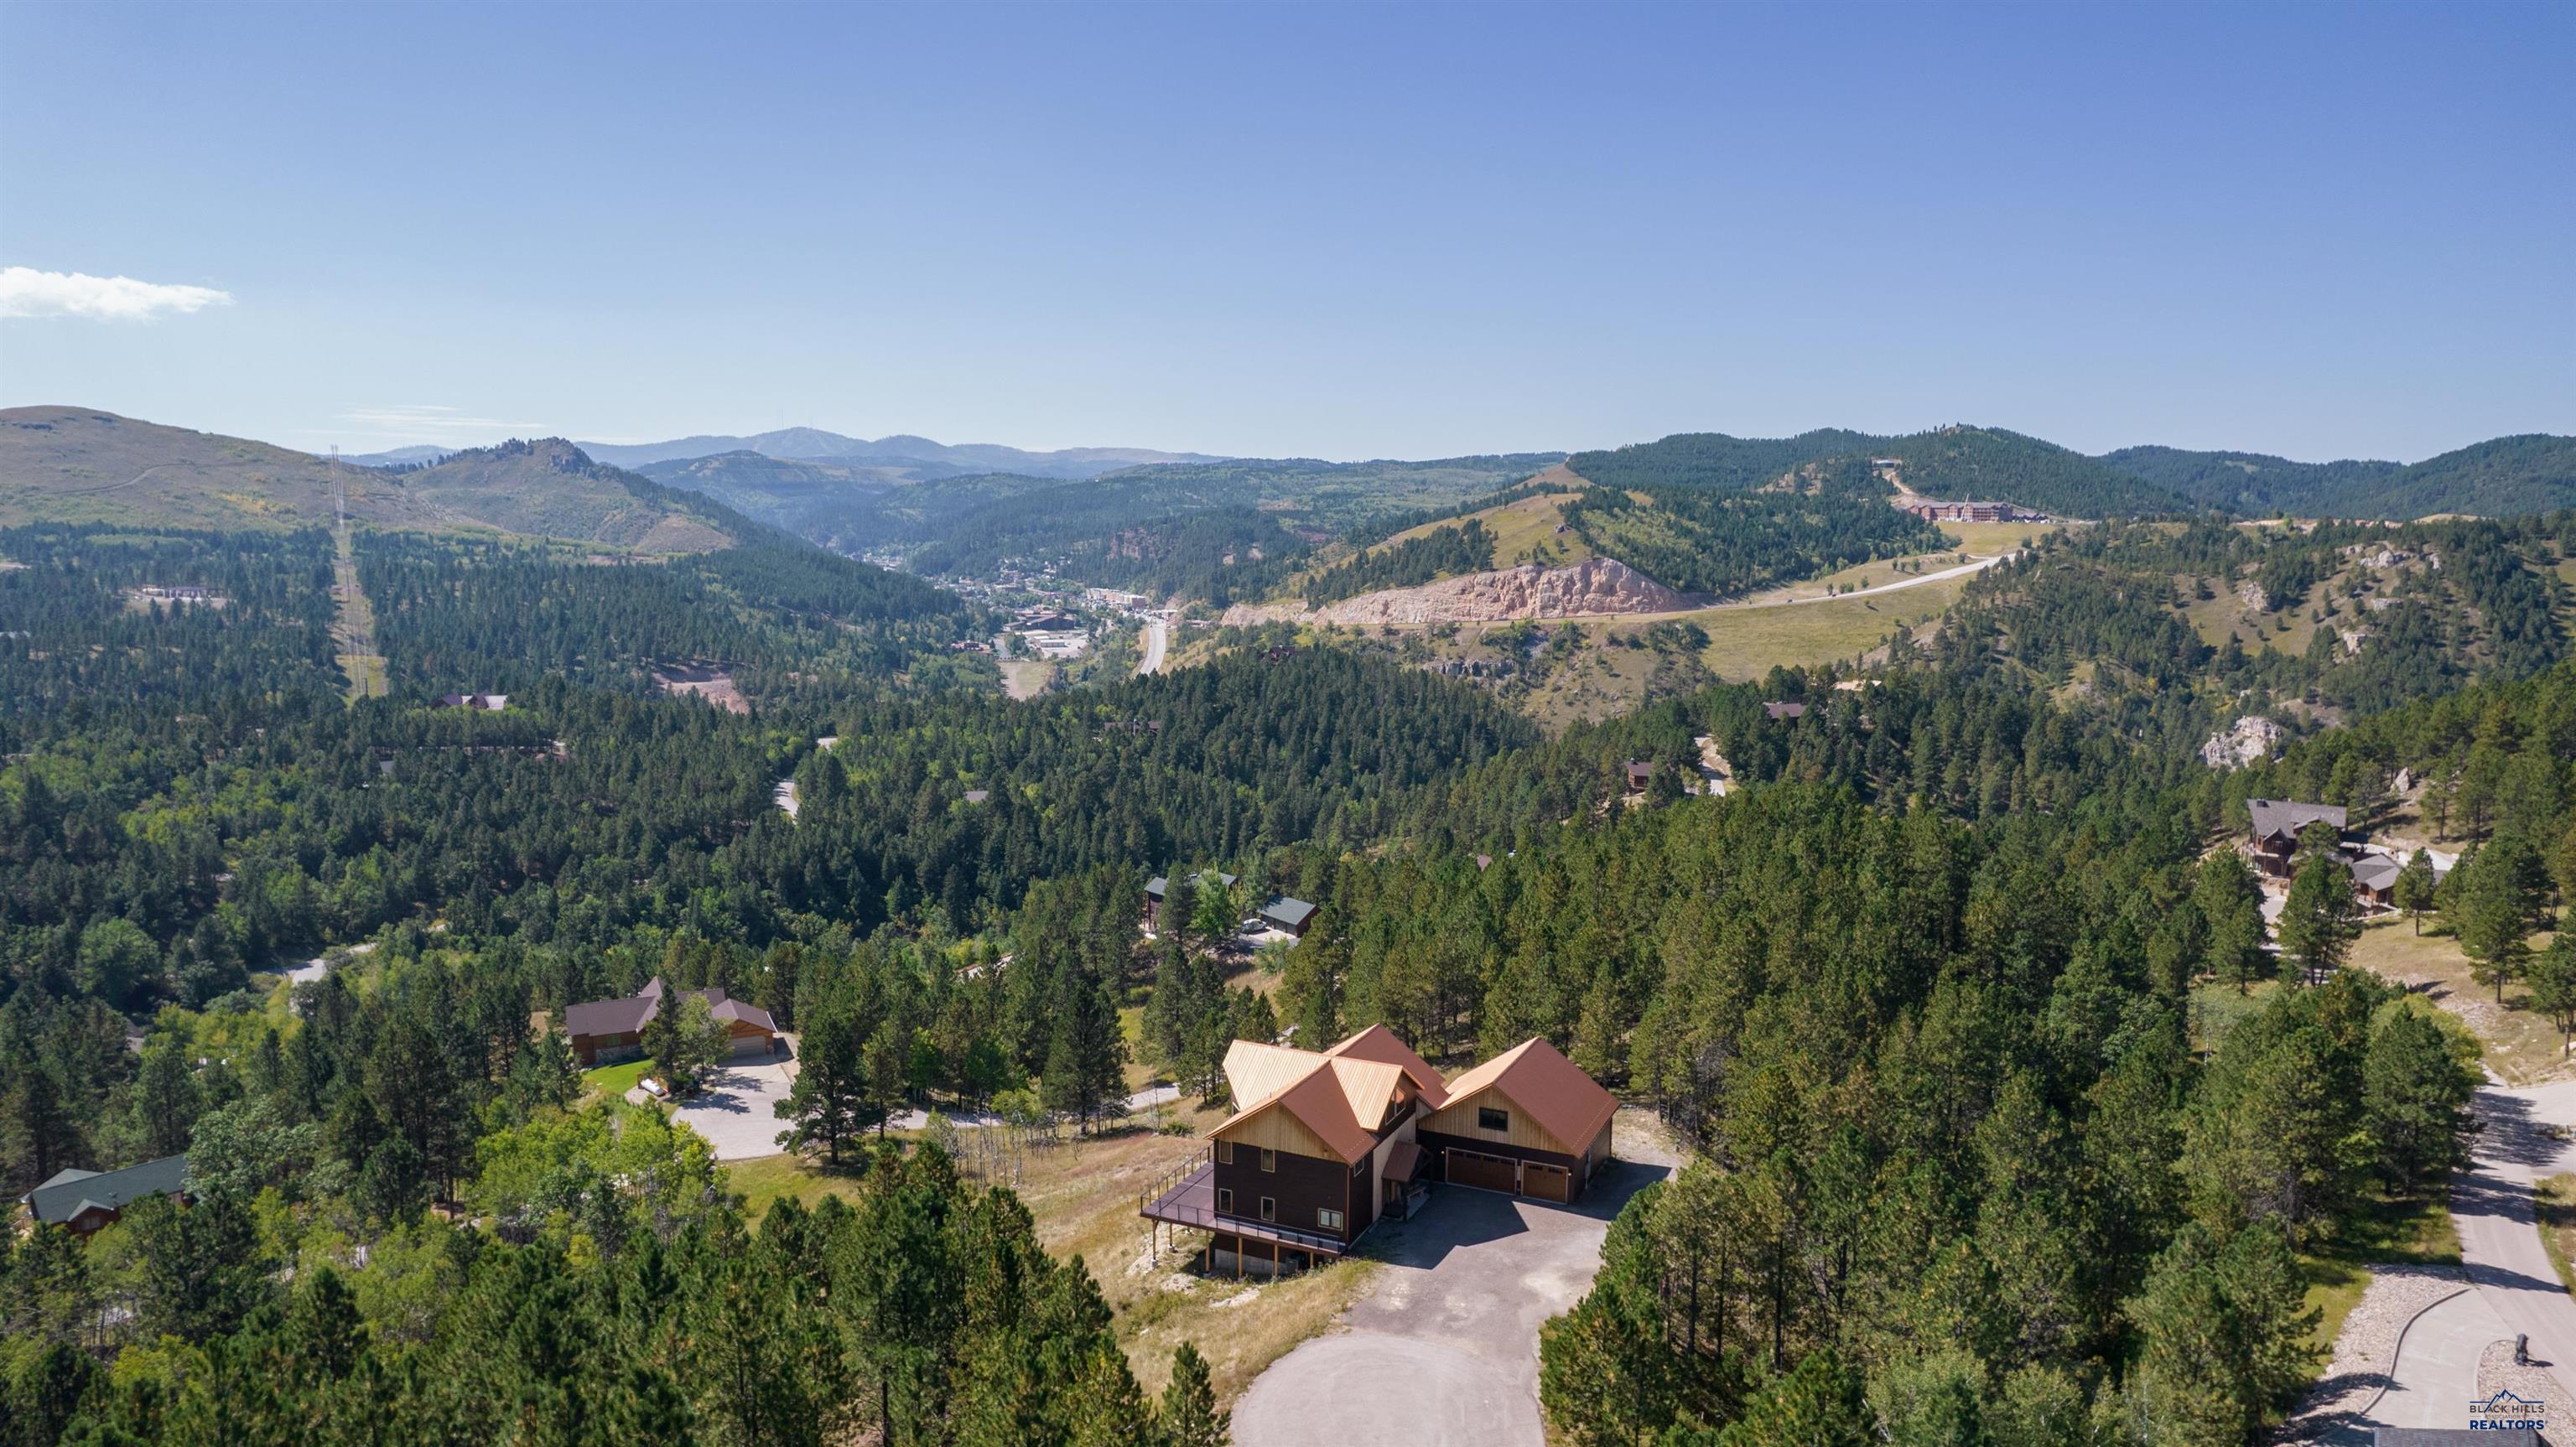 Listed by Lori Barnett, Engel & Völkers 605-786-5817.   This stunning 5-bedroom, 5.5-bathroom home is situated just minutes away from downtown Deadwood, skiing, snowmobile trails, hiking, & biking trails. Nestled on nearly 3 acres at the end of Shirt Tail Gulch, it boasts breathtaking views of the magnificent Black Hills, making it an ideal vacation home, investment property, or permanent residence.  The main level features the master, well appointed kitchen, & great room, which has impressive, two-story views. Upstairs, there is a sizable living room, two large bedrooms with ensuite bathrooms. Downstairs, you'll find a family room, plumbed for a wet bar, and two additional bedrooms, both of which also have ensuite bathrooms.  Enjoy the brand-new, enormous deck with a hot tub as you take in the panoramic views of Deadwood. This property also includes an oversized three-car garage with an extra storage room above it that could be used as a bunkhouse. Currently a nightly rental.